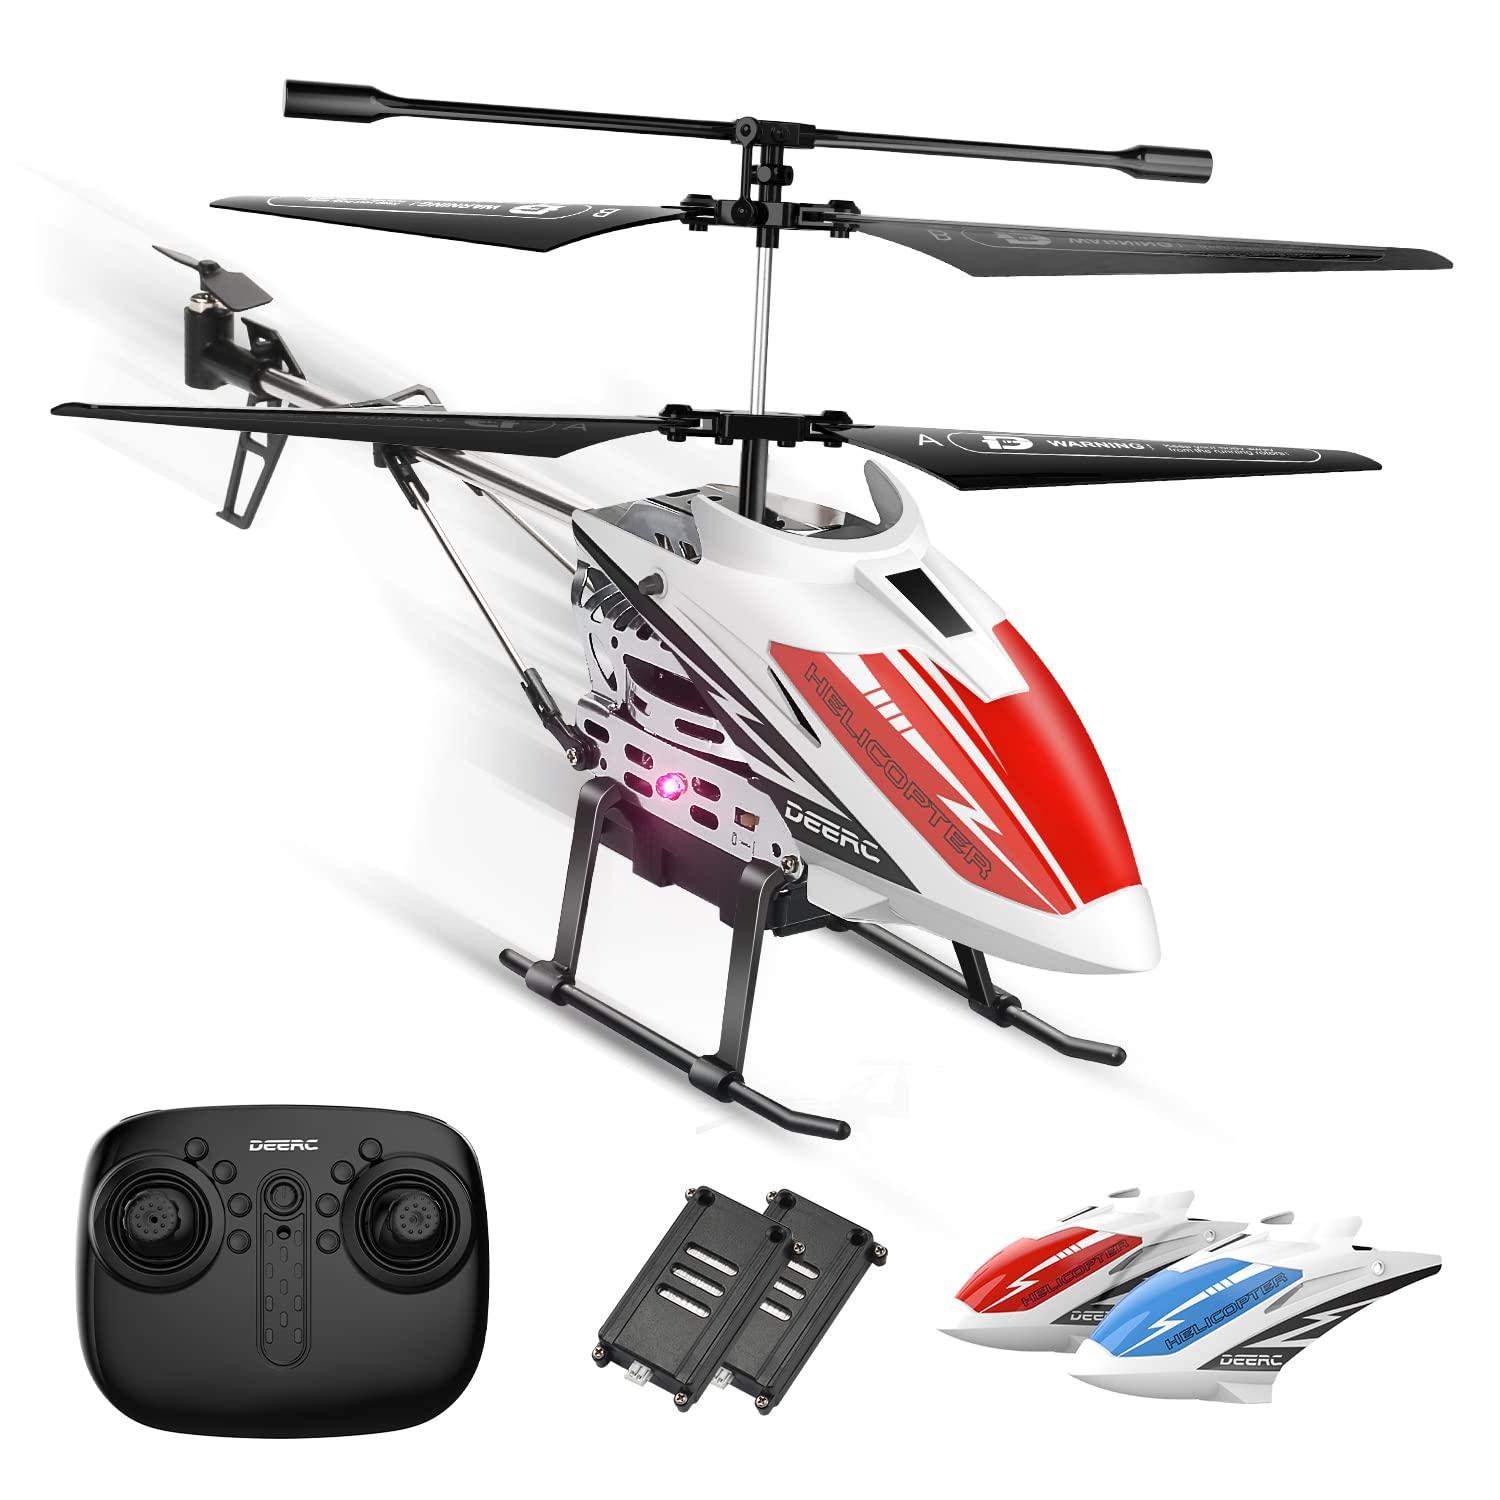 Remote Control Helicopter 100: Product Performance: Exploring the Top-rated Remote Control Helicopter 100 for Enthusiasts and Hobbyists.